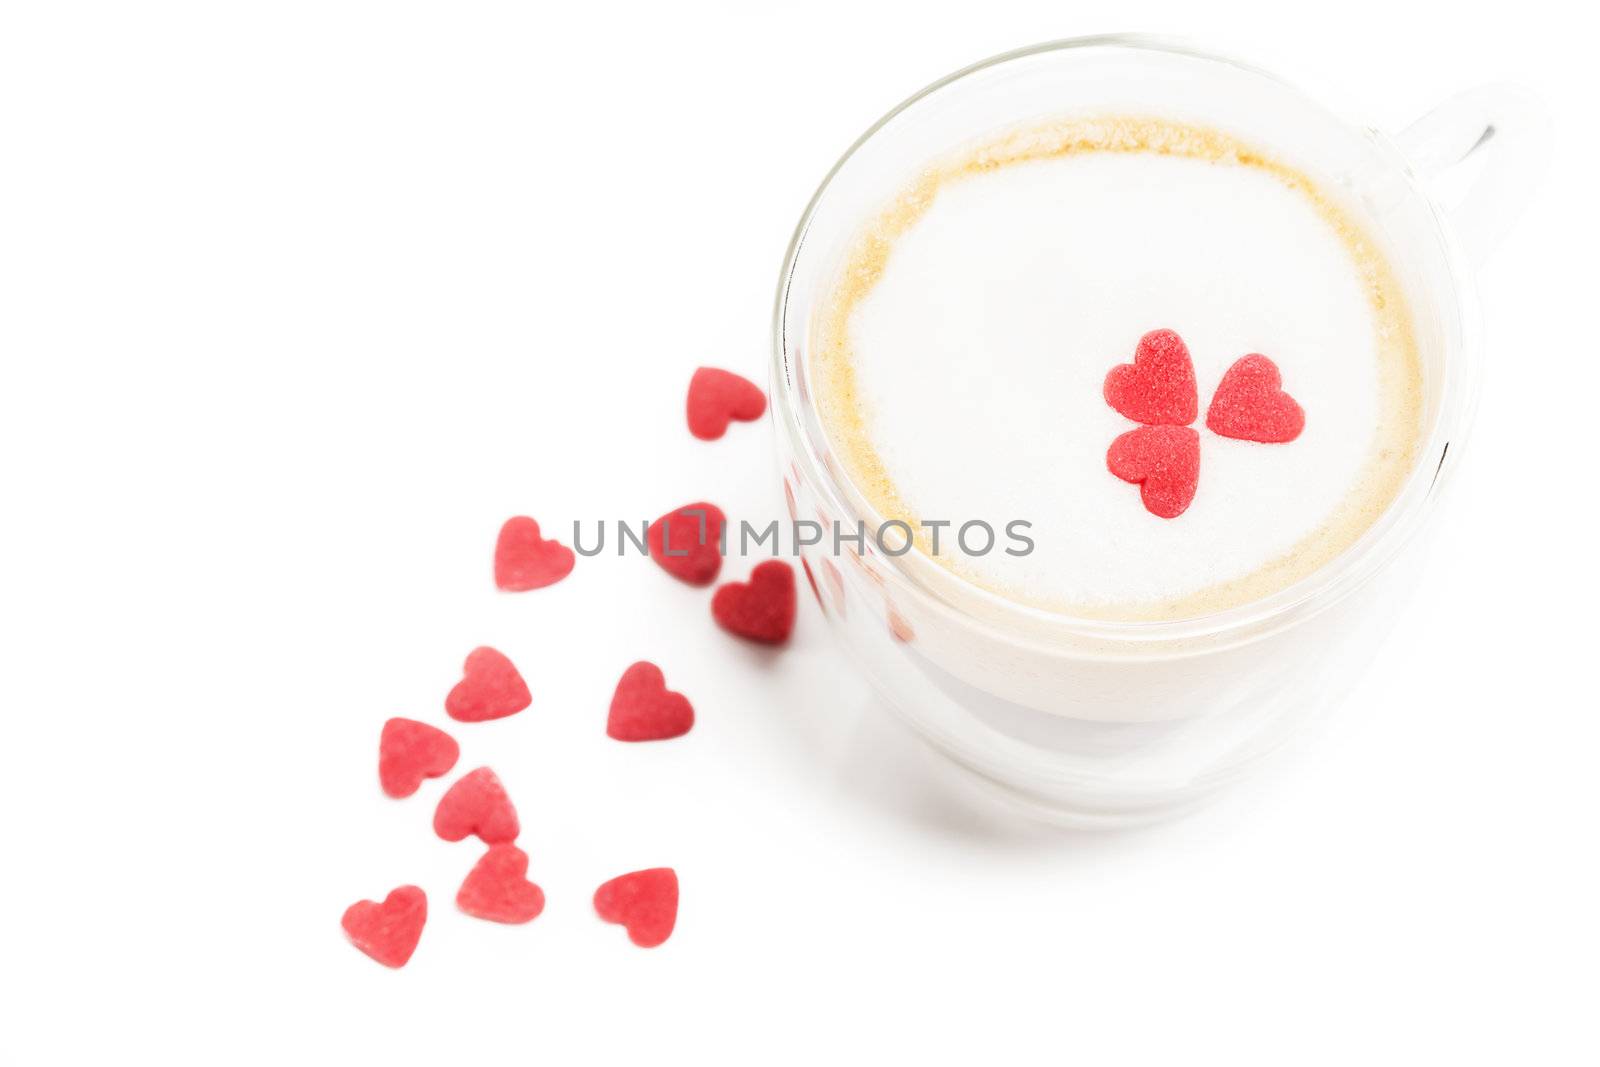 sugar hearts on and aside a espresso with milk foam on white background